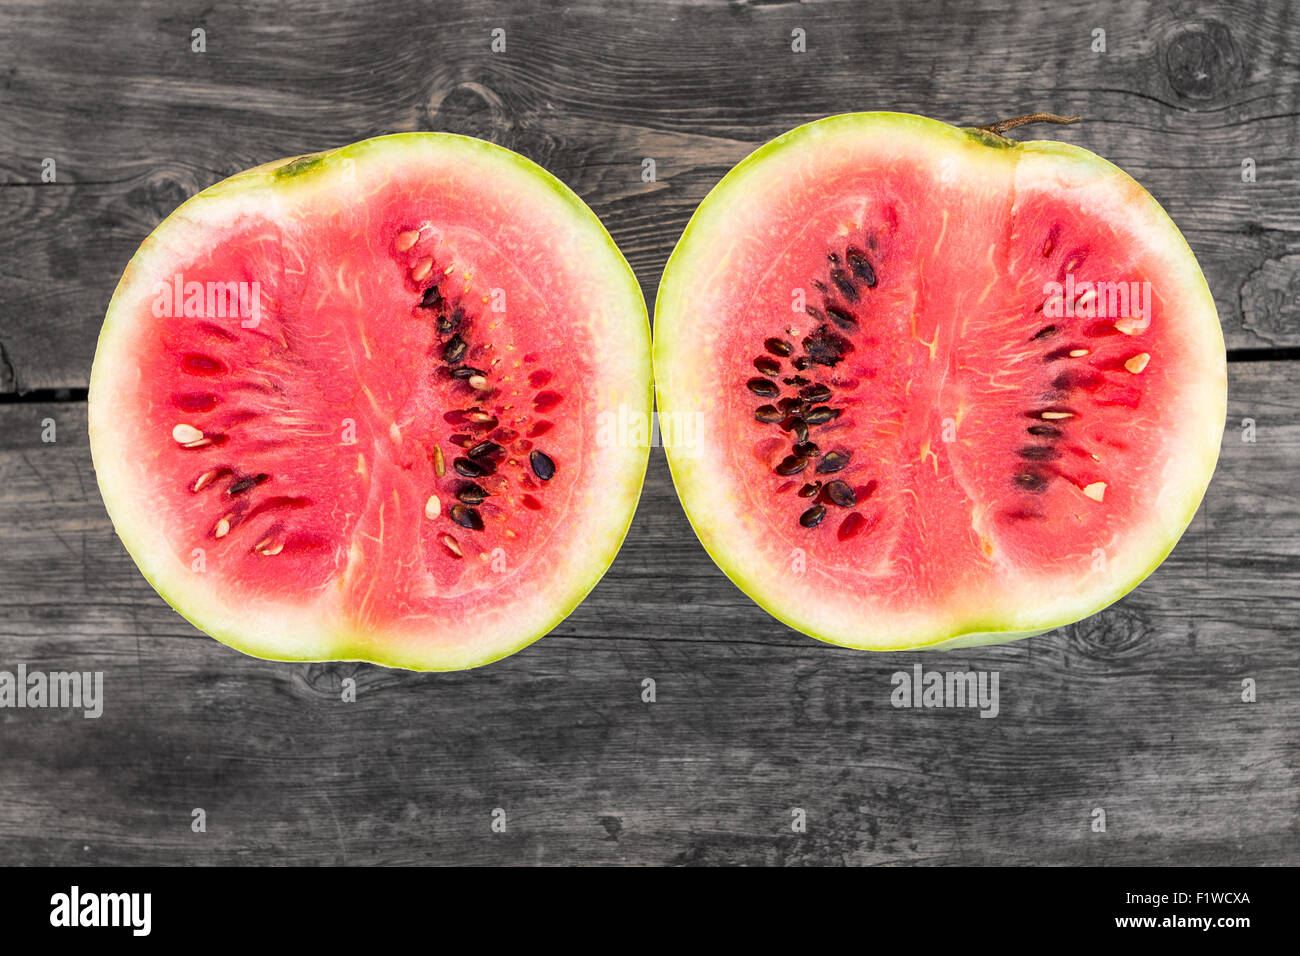 Two pieces of cut in half ripe fresh watermelon on wooden background. Top view image Stock Photo